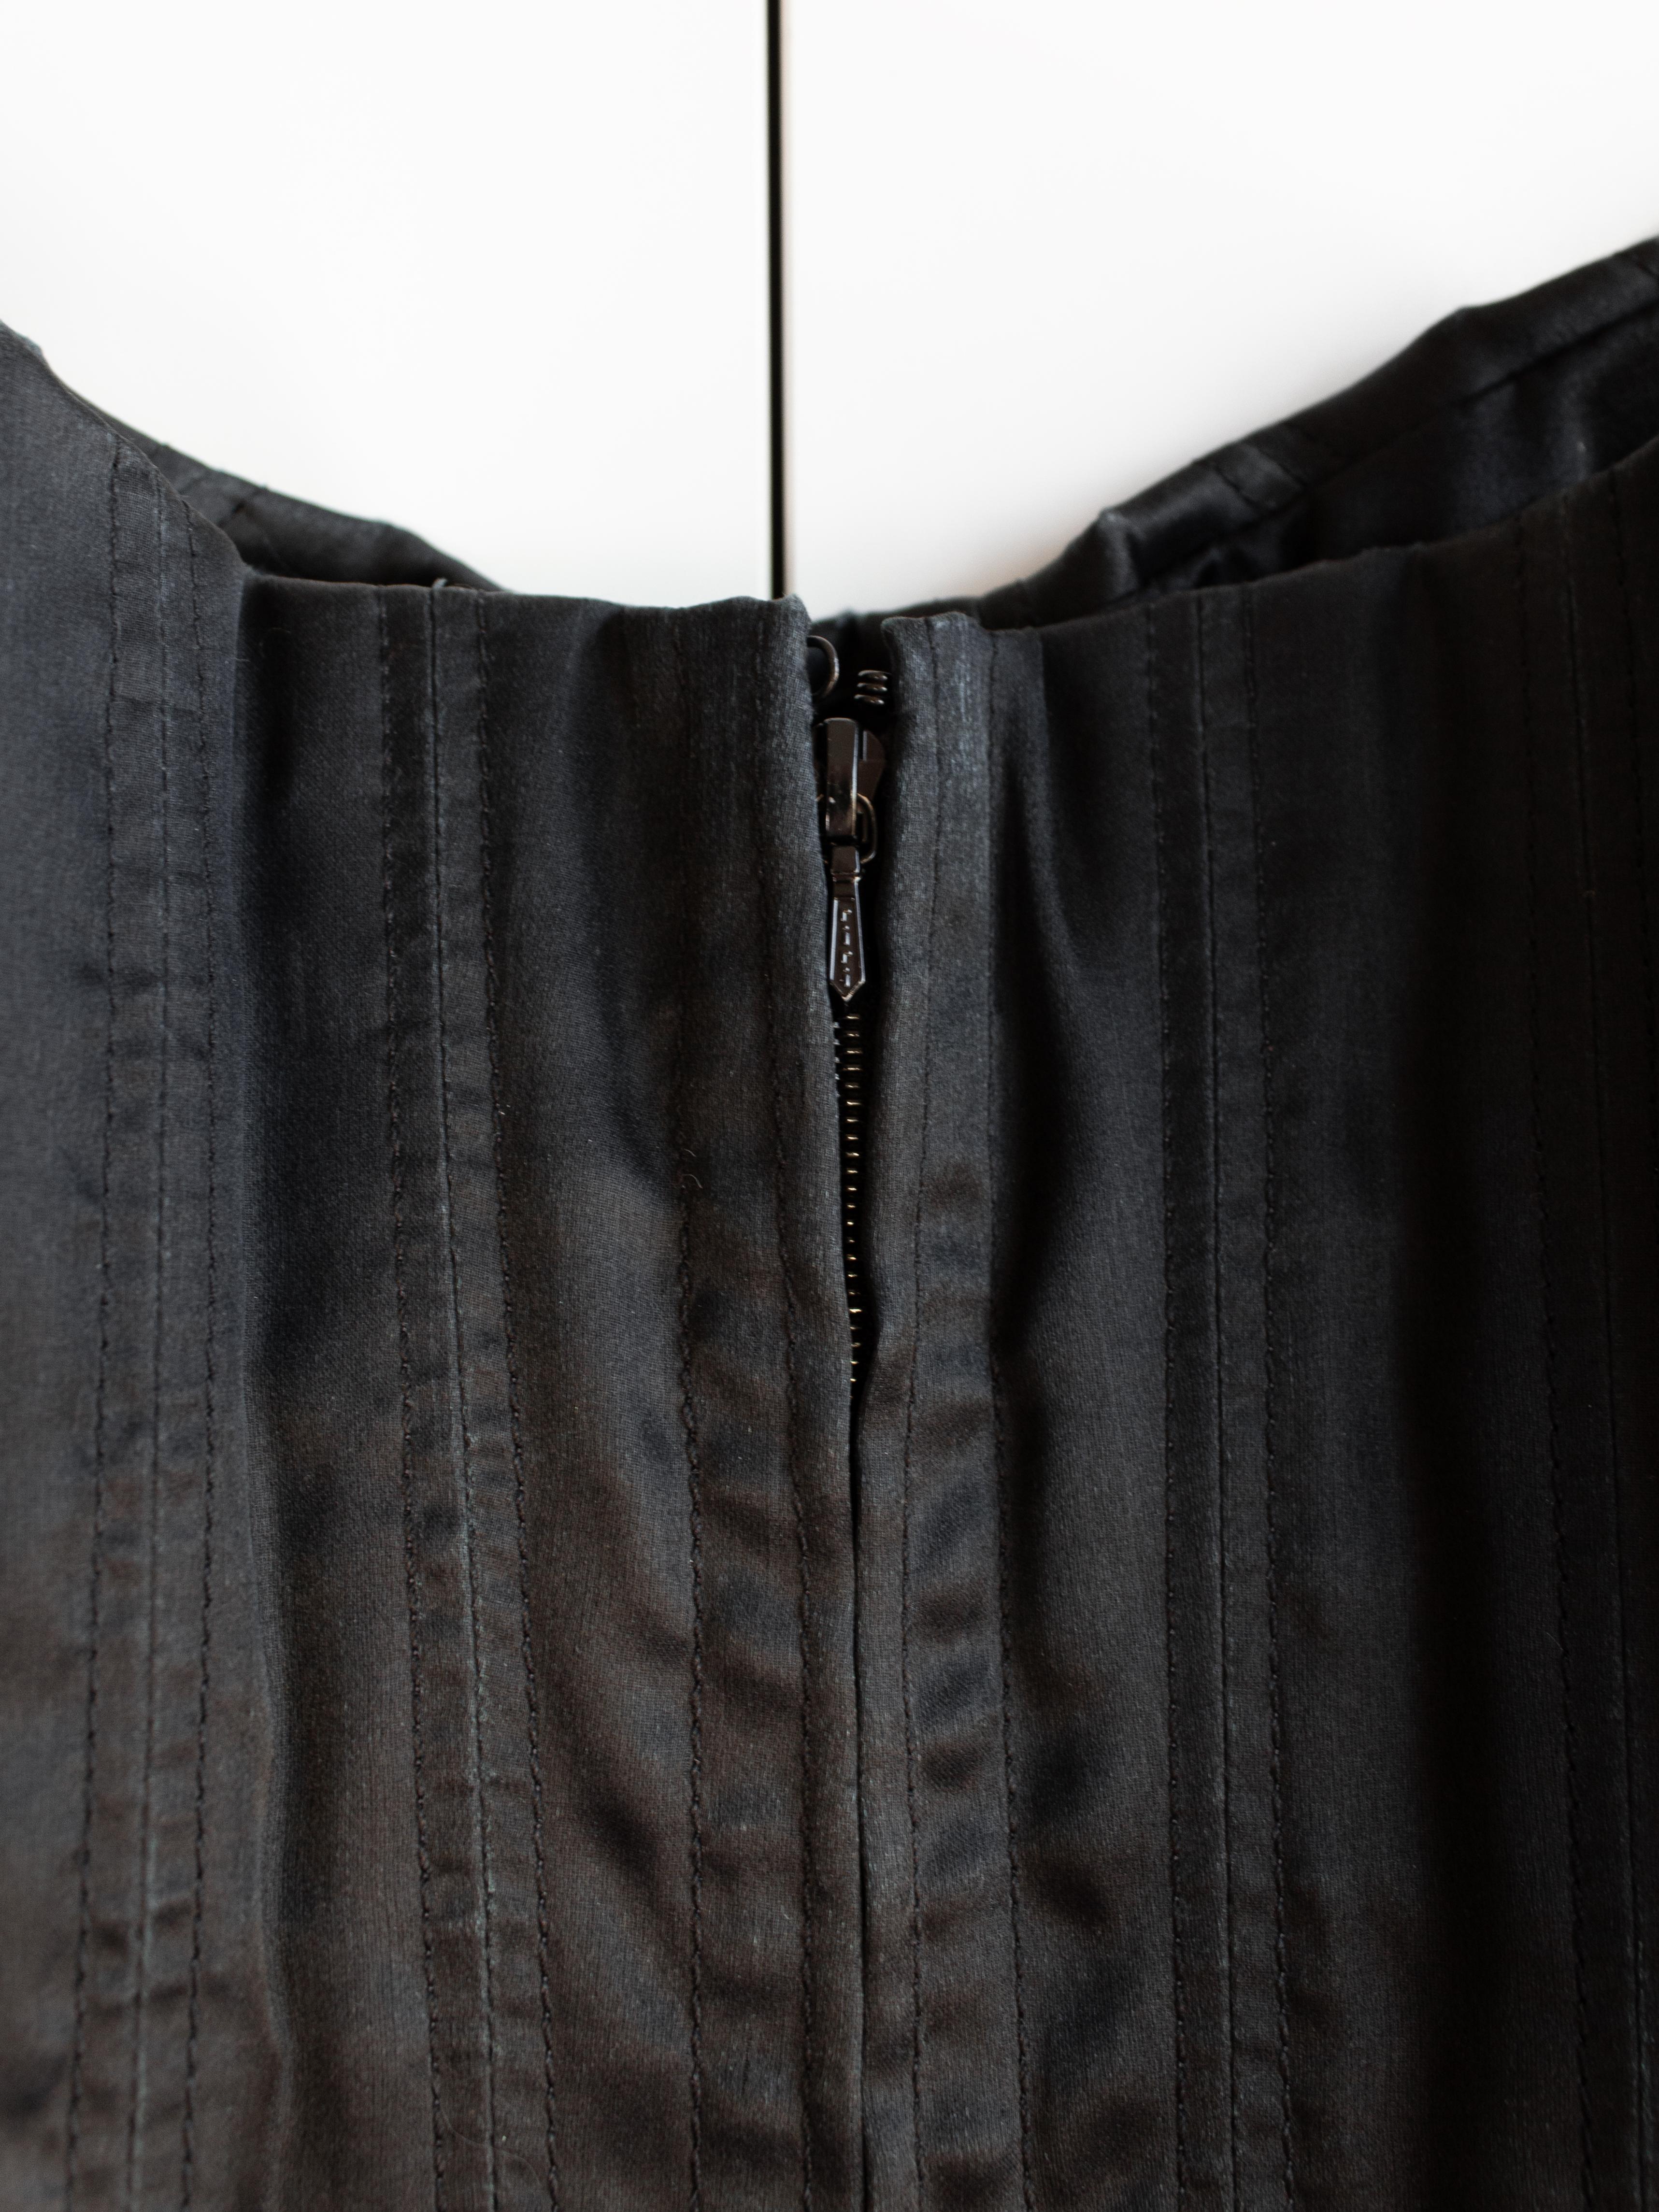 Chanel Vintage Haute Couture Fall/Winter 1992 Black Satin Corset Gown Dress For Sale 9